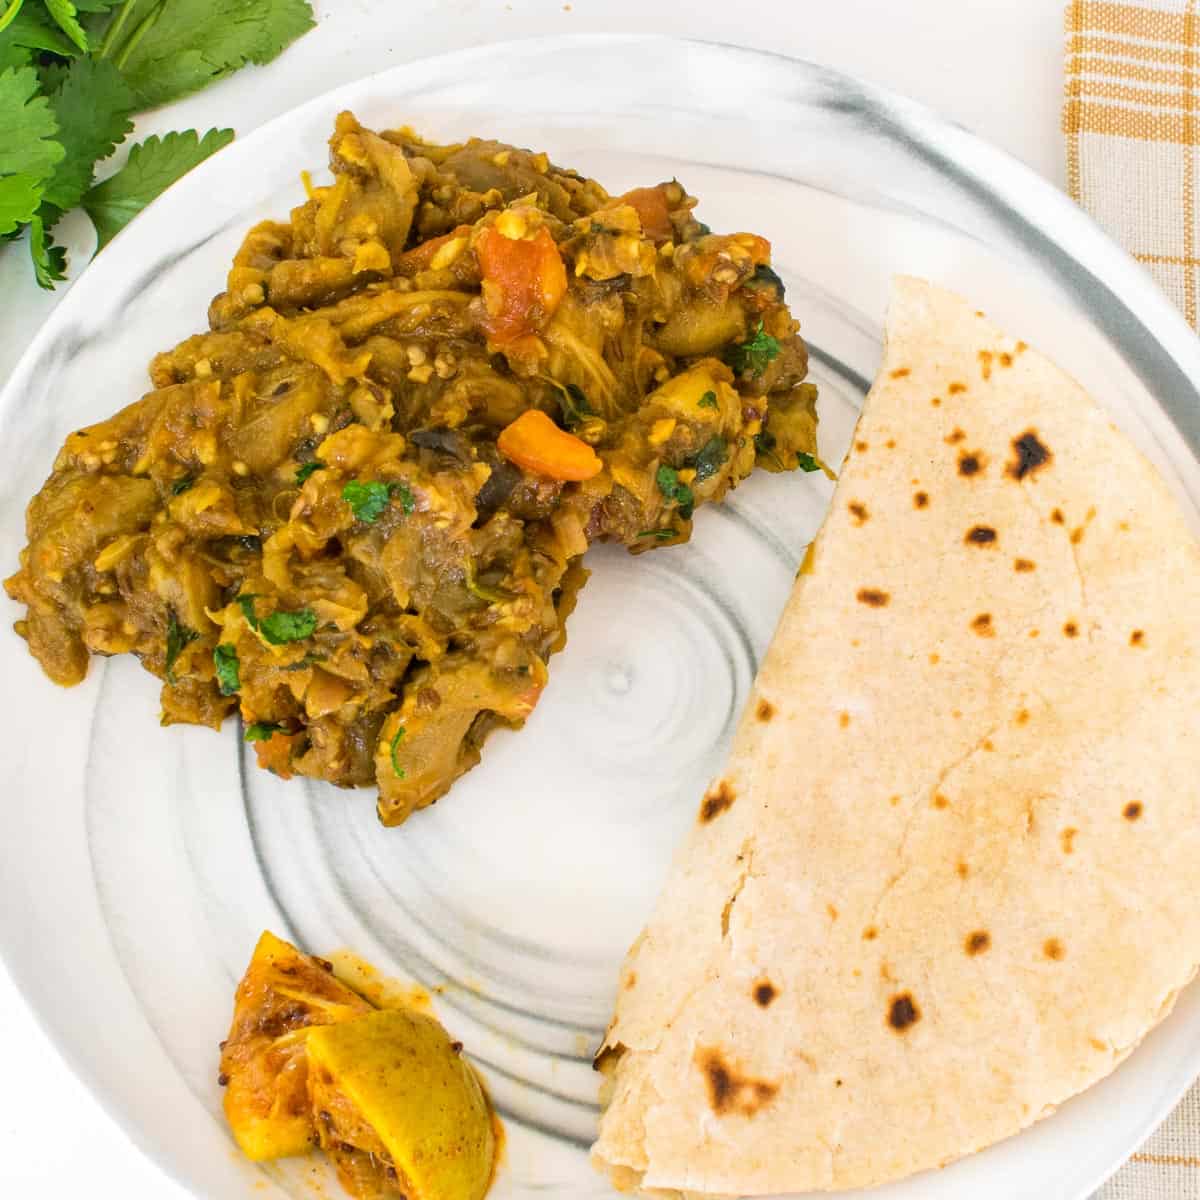 top view of the served plate with a serving of baingan bharta with roti and pickles.